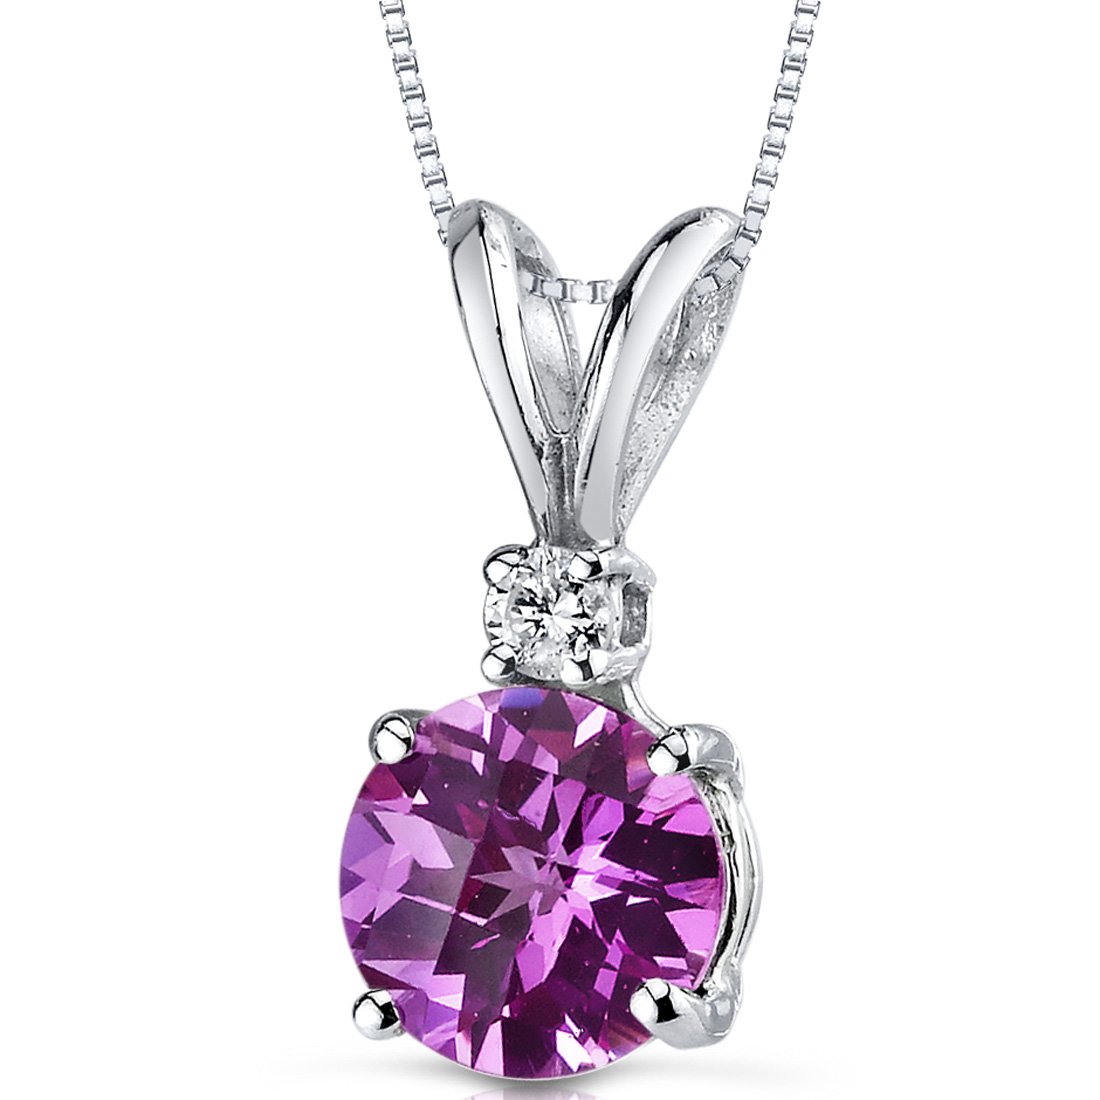 PEORA Created Pink Sapphire with Genuine Diamond Pendant in 14K White Gold, Elegant Solitaire, Round Shape, 6.50mm, 1.4 Carats total